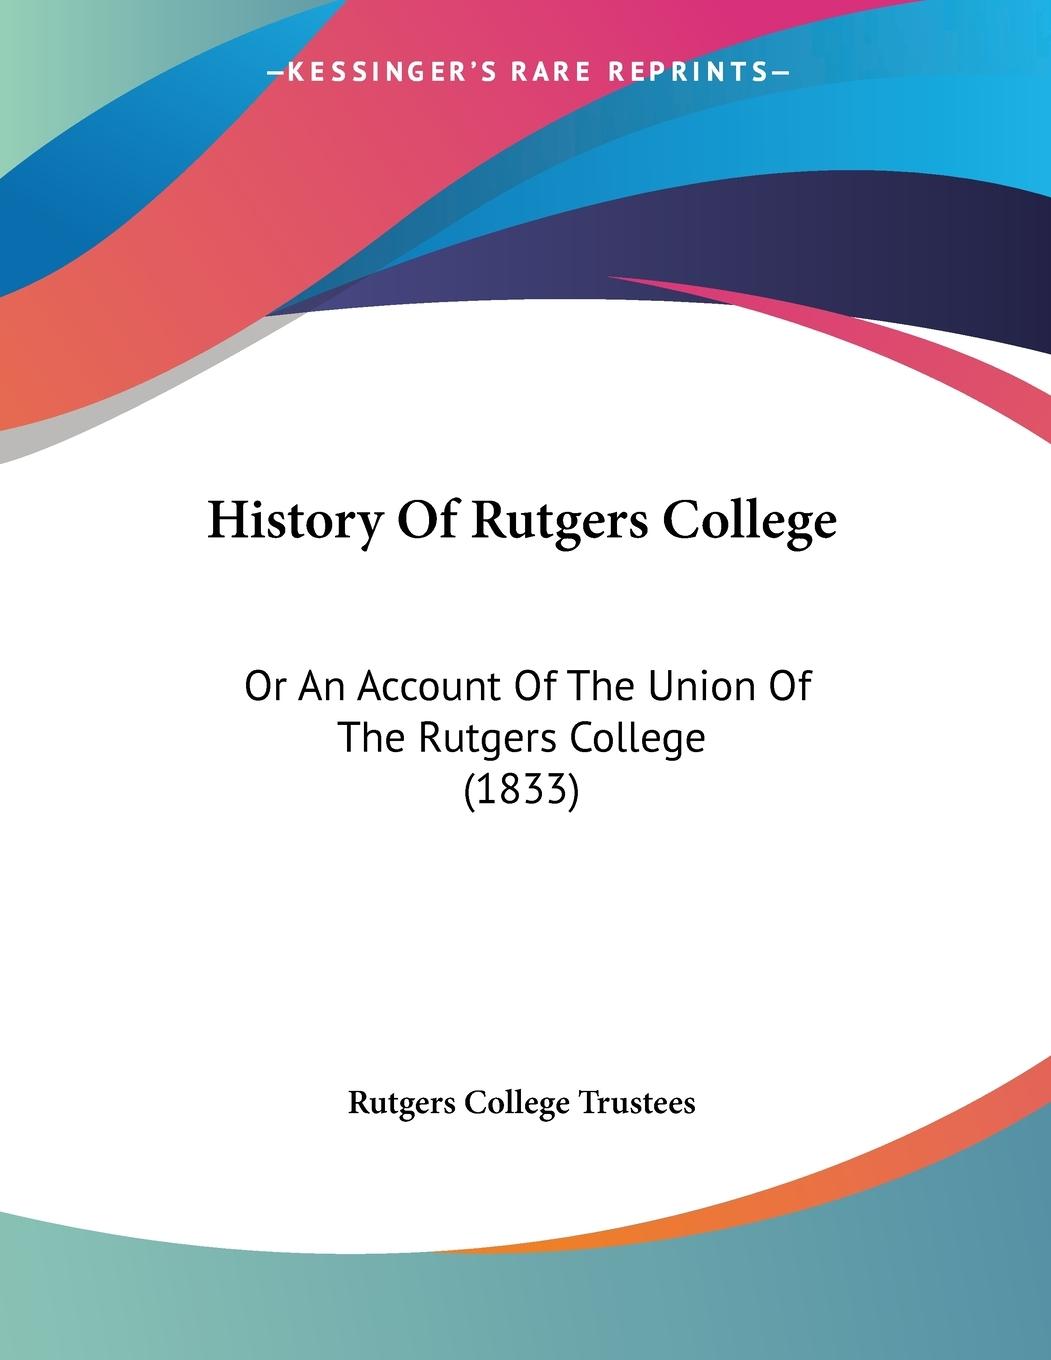 History Of Rutgers College - Rutgers College Trustees